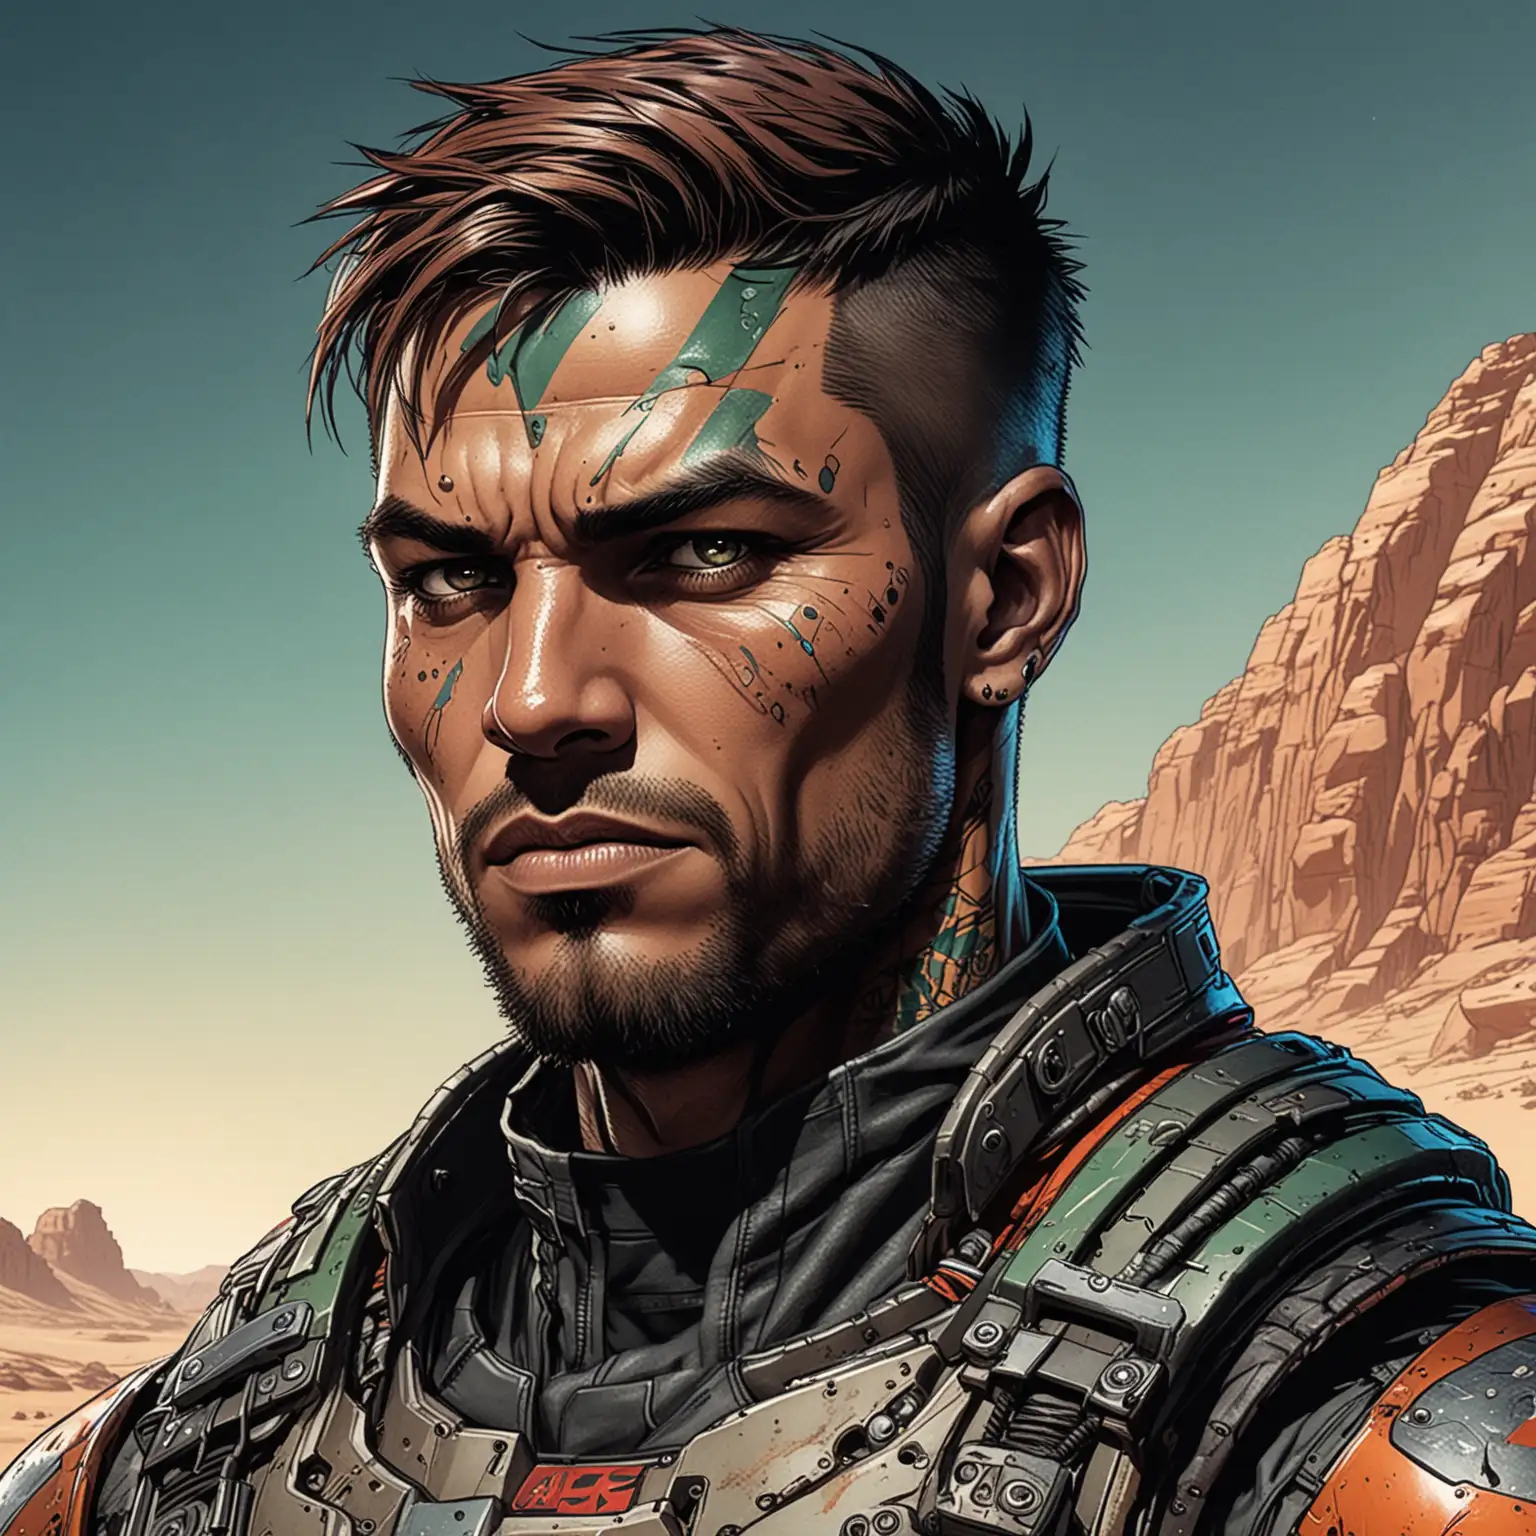 comic book inked color art style; close up portrait; male martian freedom fighter; cyberpunk